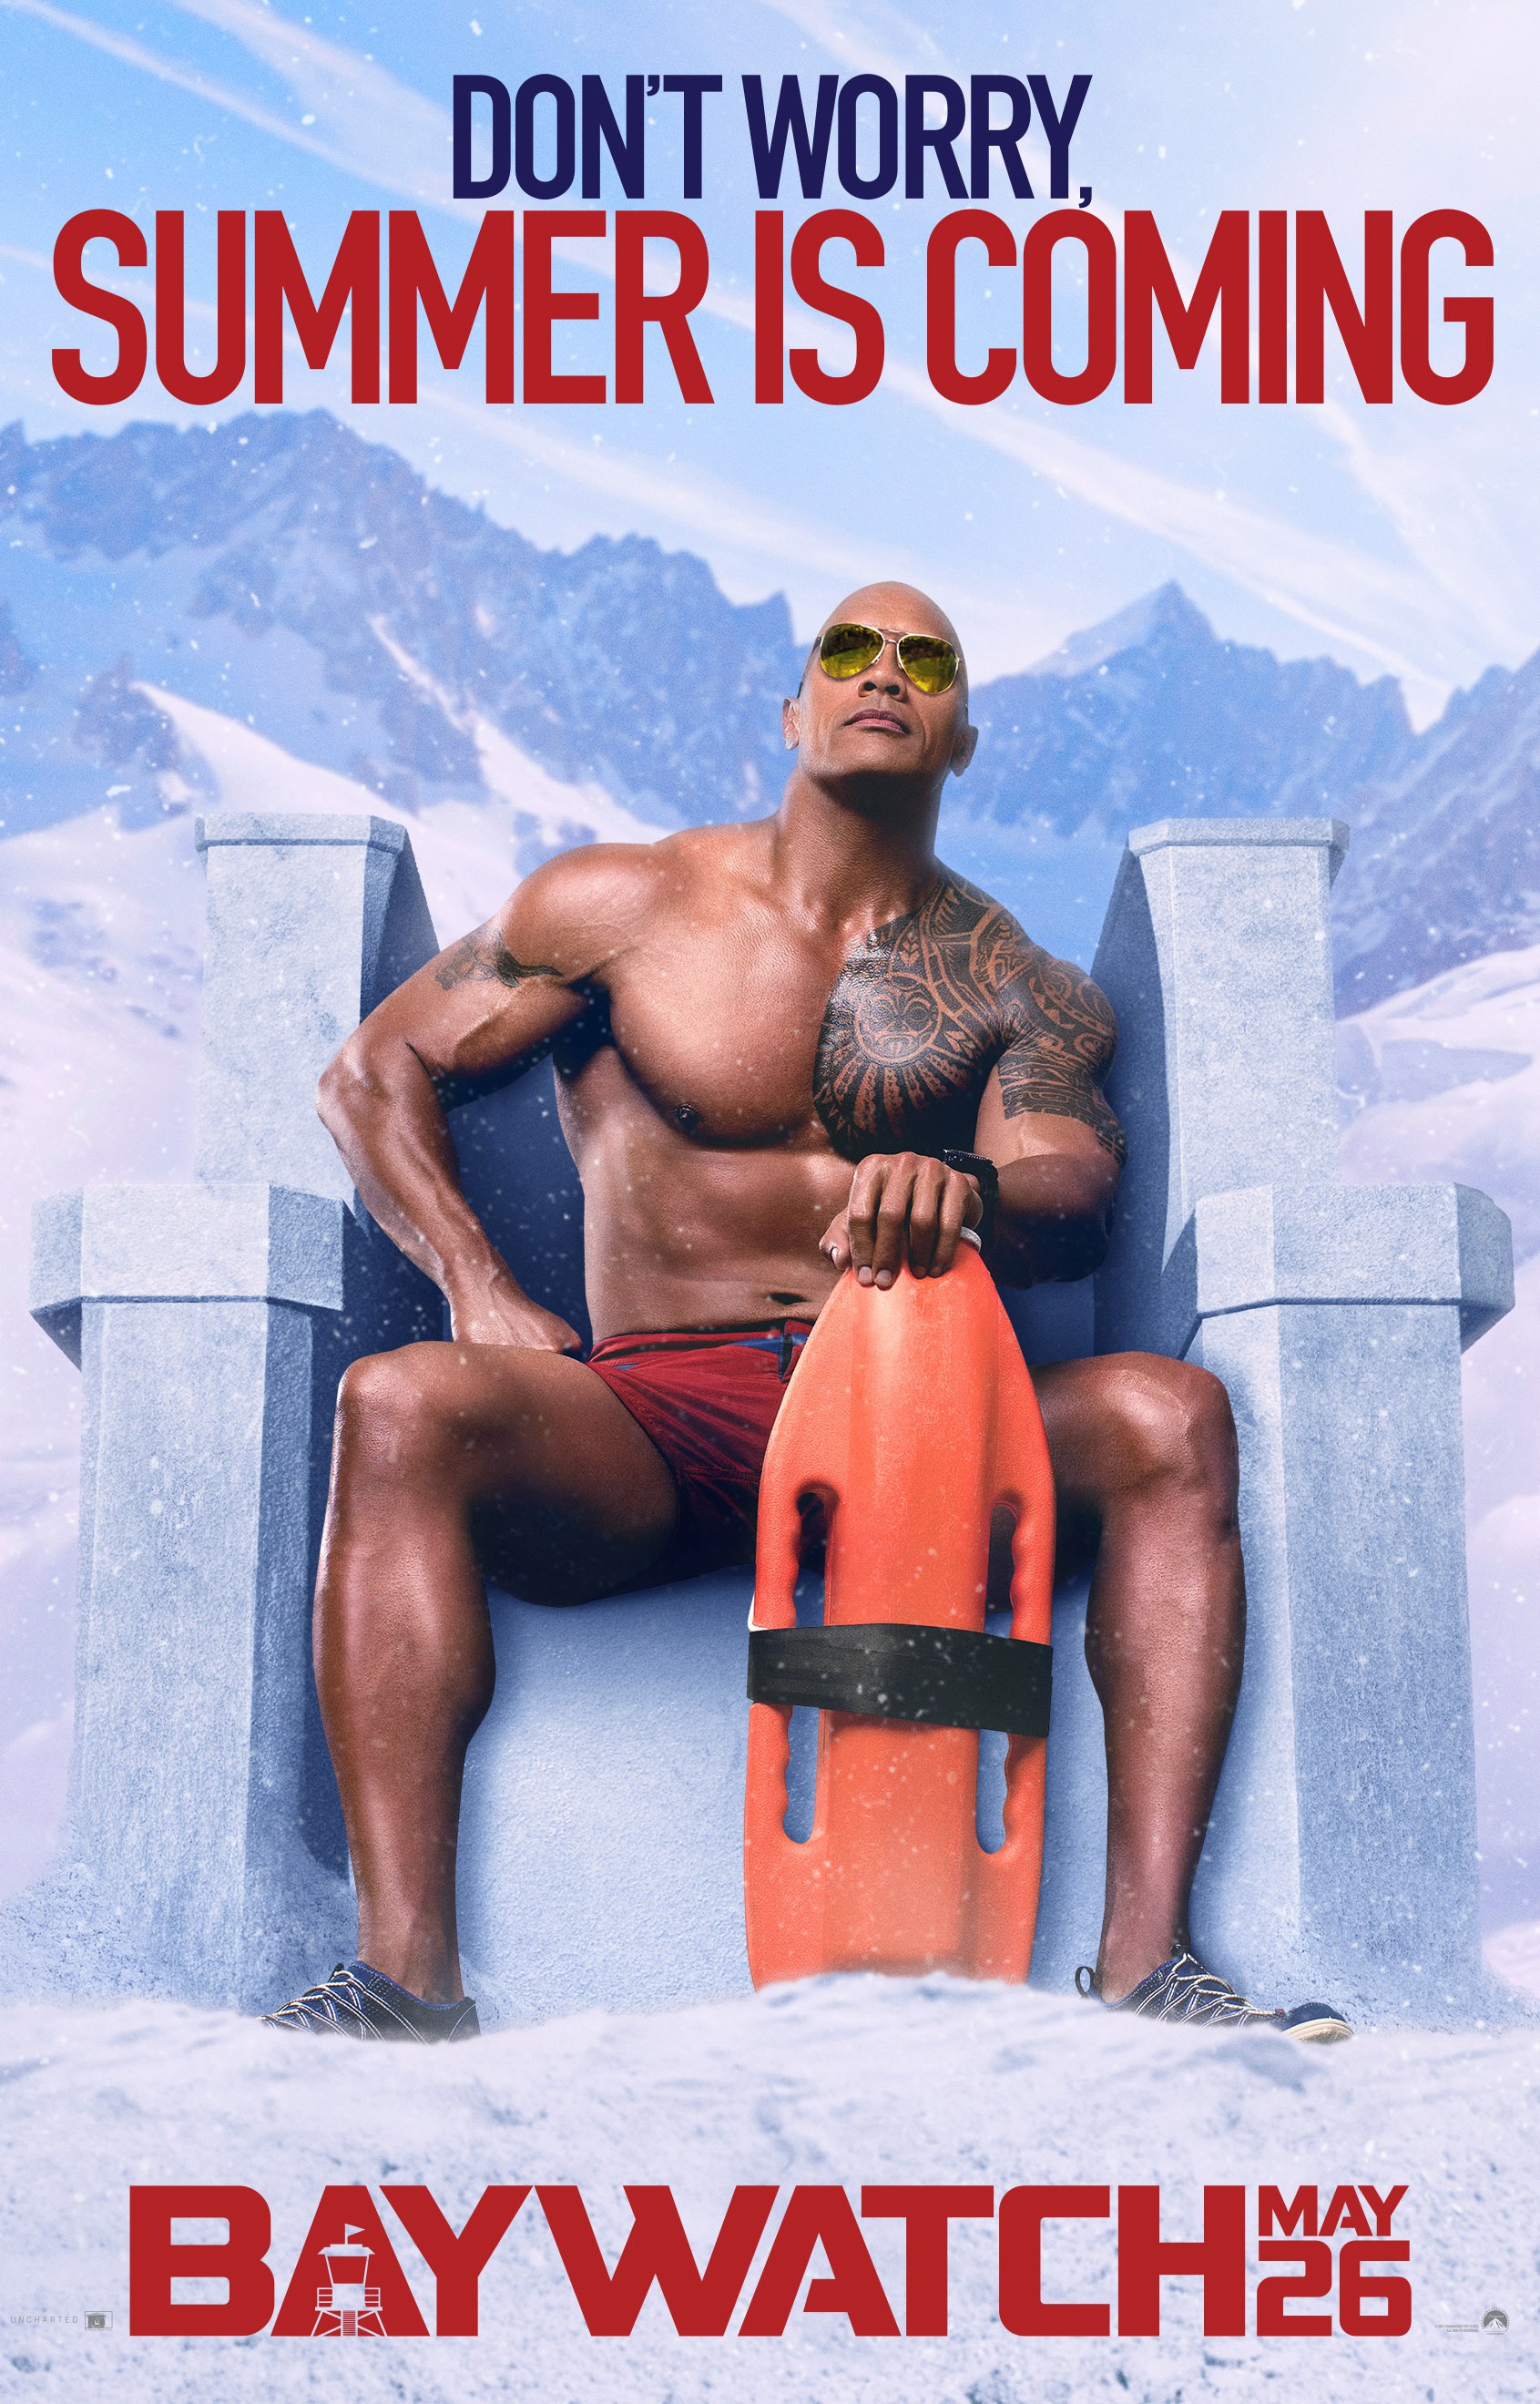 Mega Sized Movie Poster Image for Baywatch (#10 of 17)